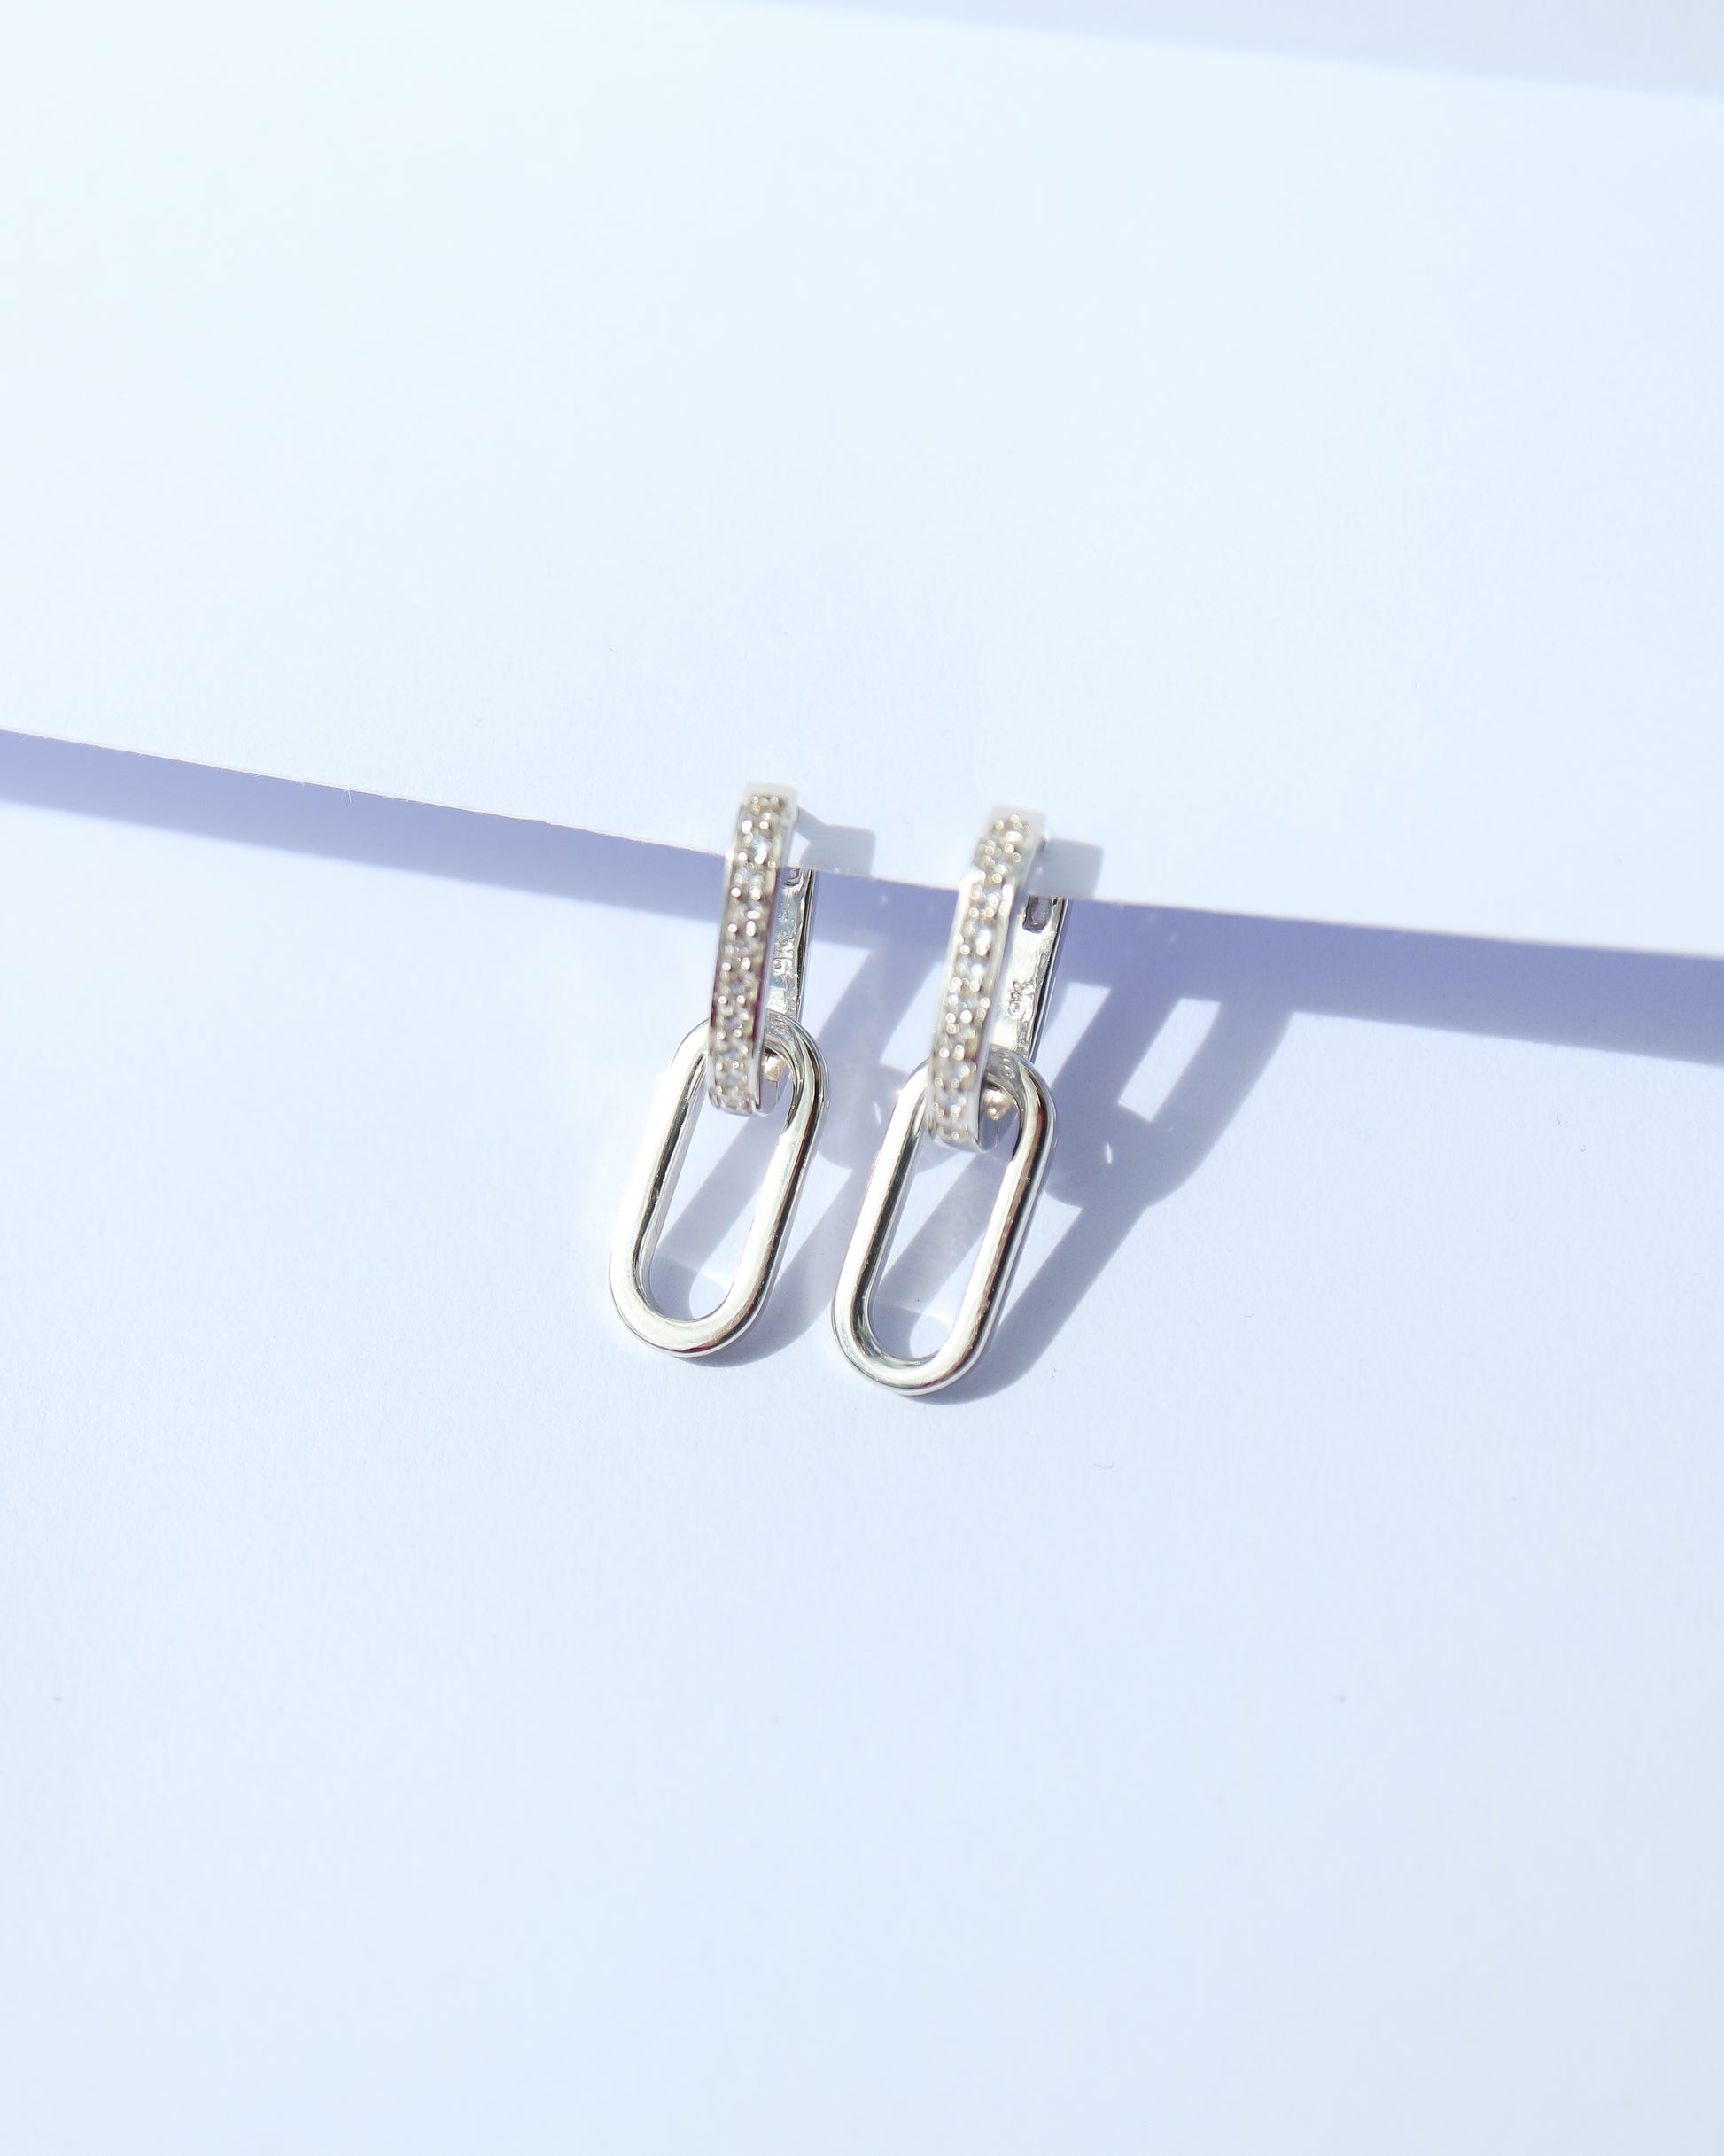 9ct gold chain reaction earrings